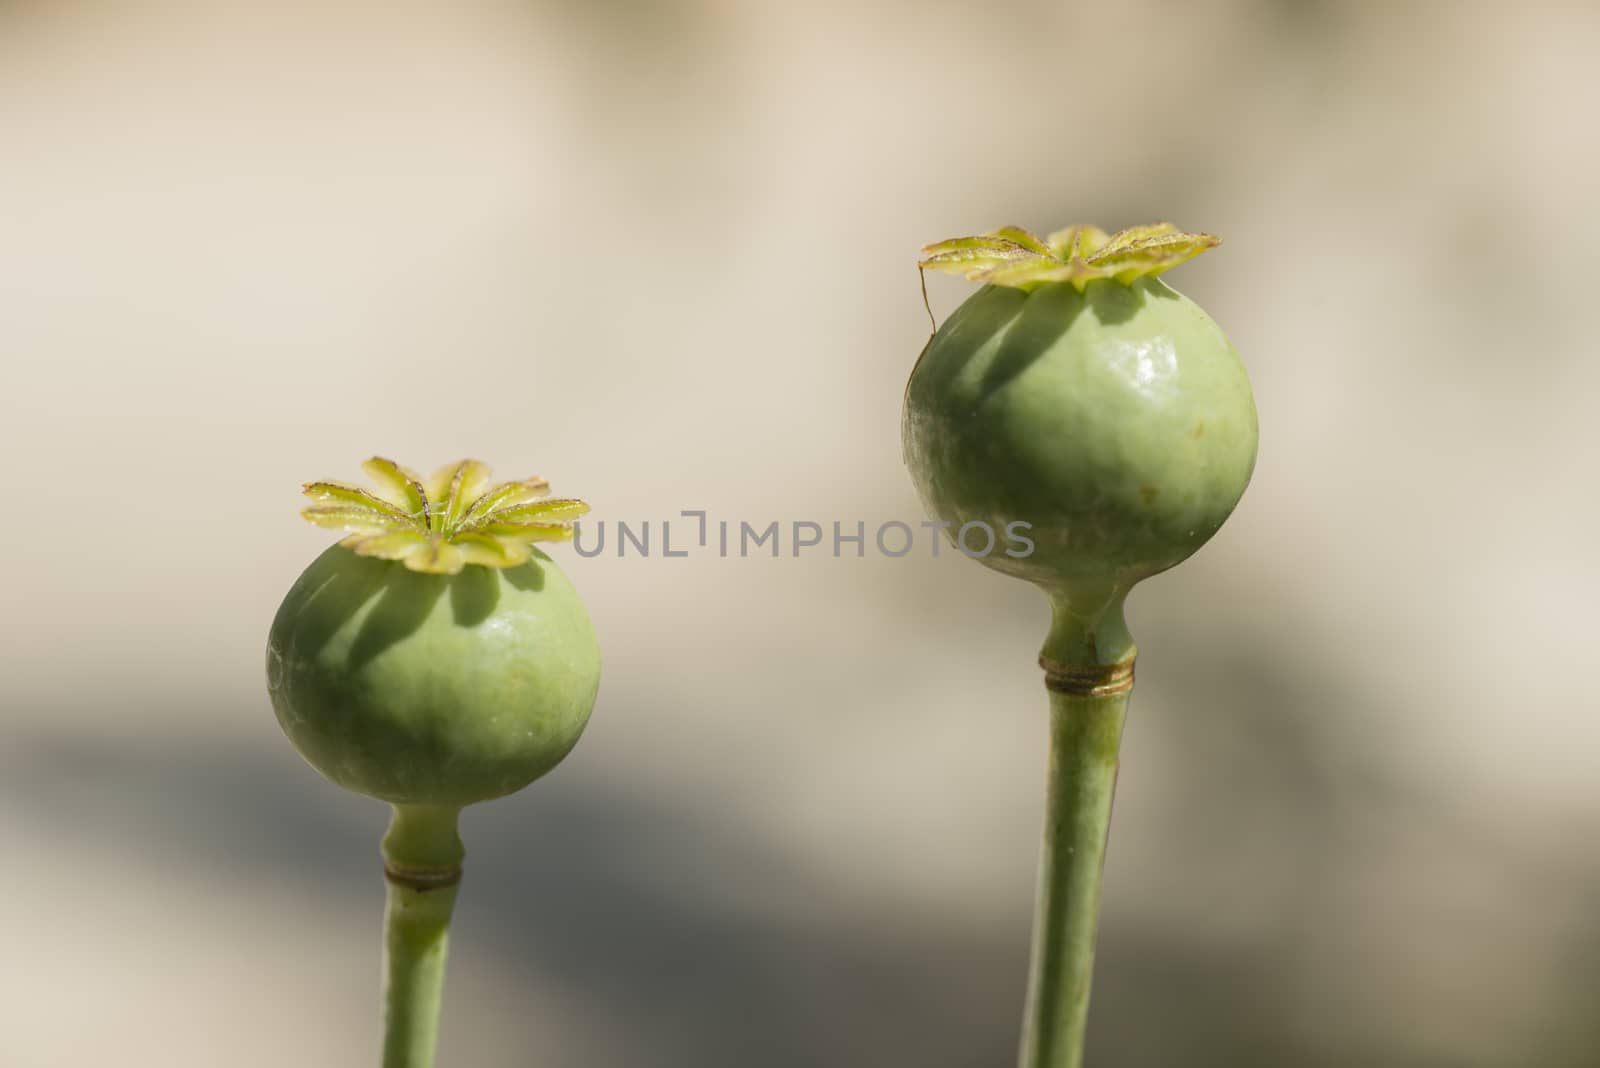 Flowers and seed pods of opium poppy plant, Papaver somniferum.